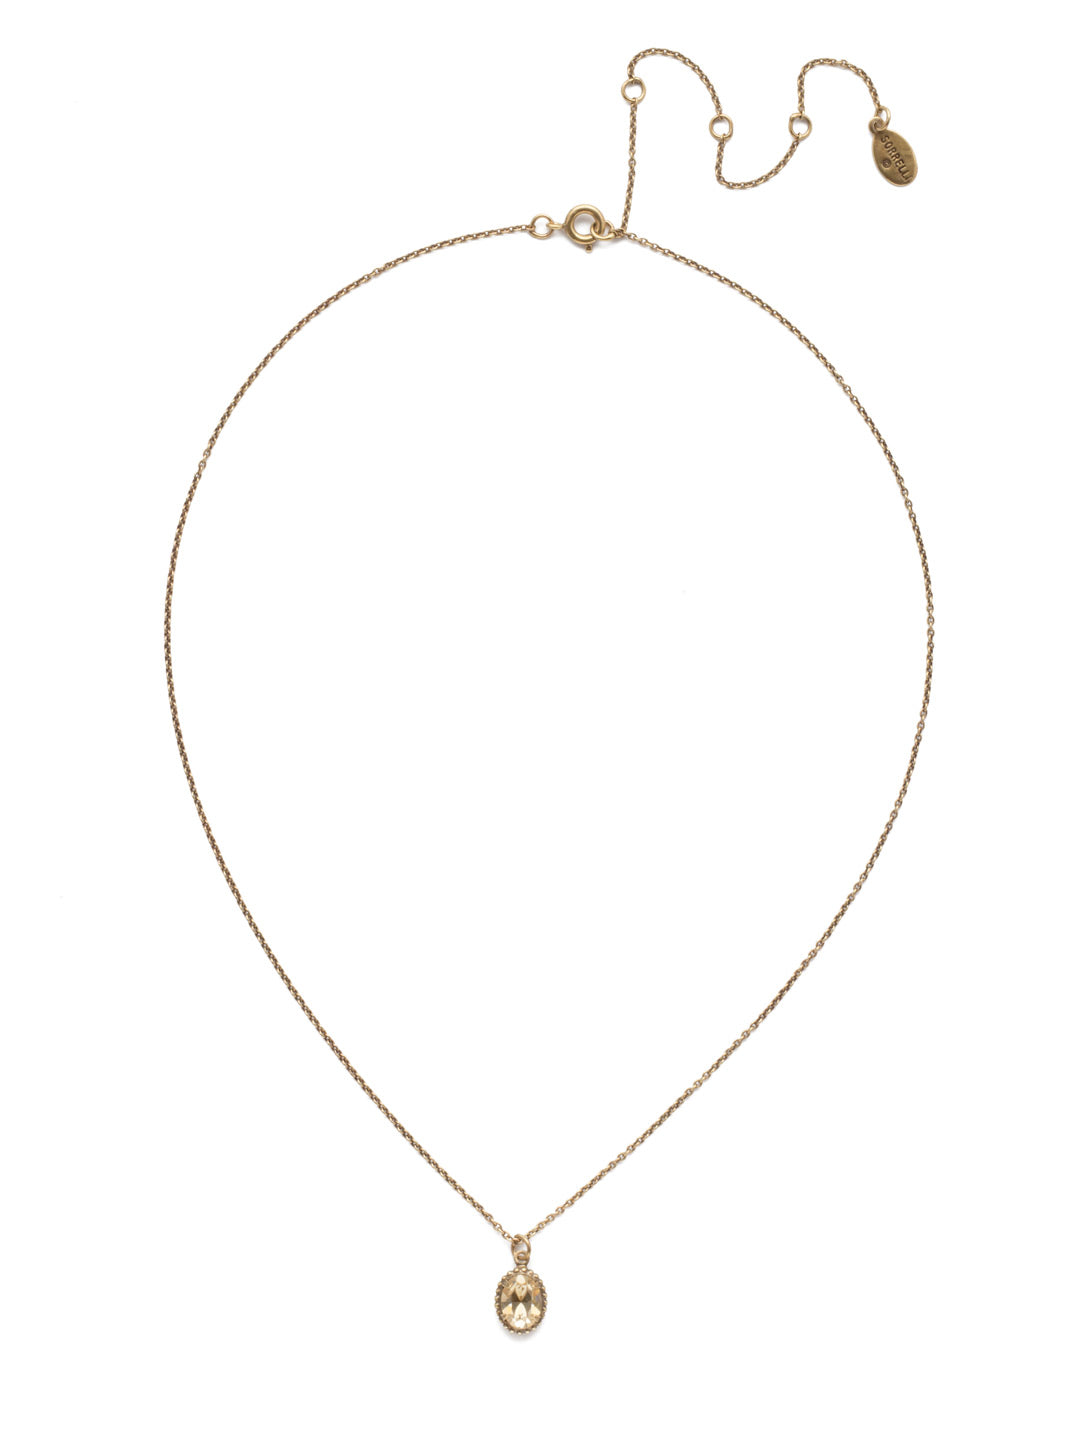 Maisie Pendant Necklace - NEF49AGCCH - <p>This is the perfect day-to-night sparkling tiny pendant necklace that has an adjustable chain to fit your neckline. From Sorrelli's Crystal Champagne collection in our Antique Gold-tone finish.</p>